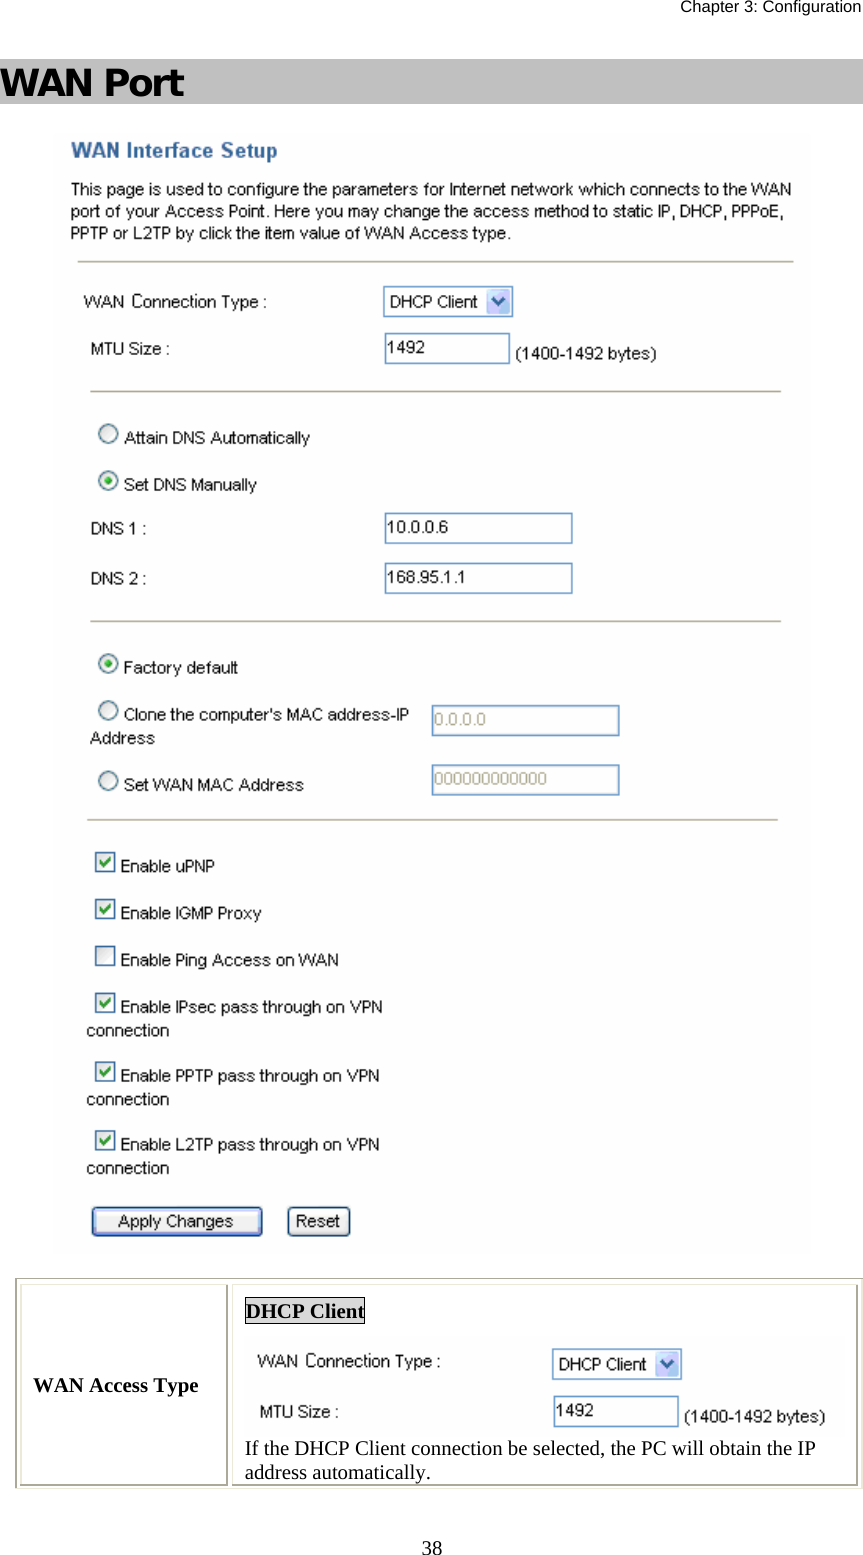   Chapter 3: Configuration  38WAN Port   WAN Access Type DHCP Client If the DHCP Client connection be selected, the PC will obtain the IP address automatically. 